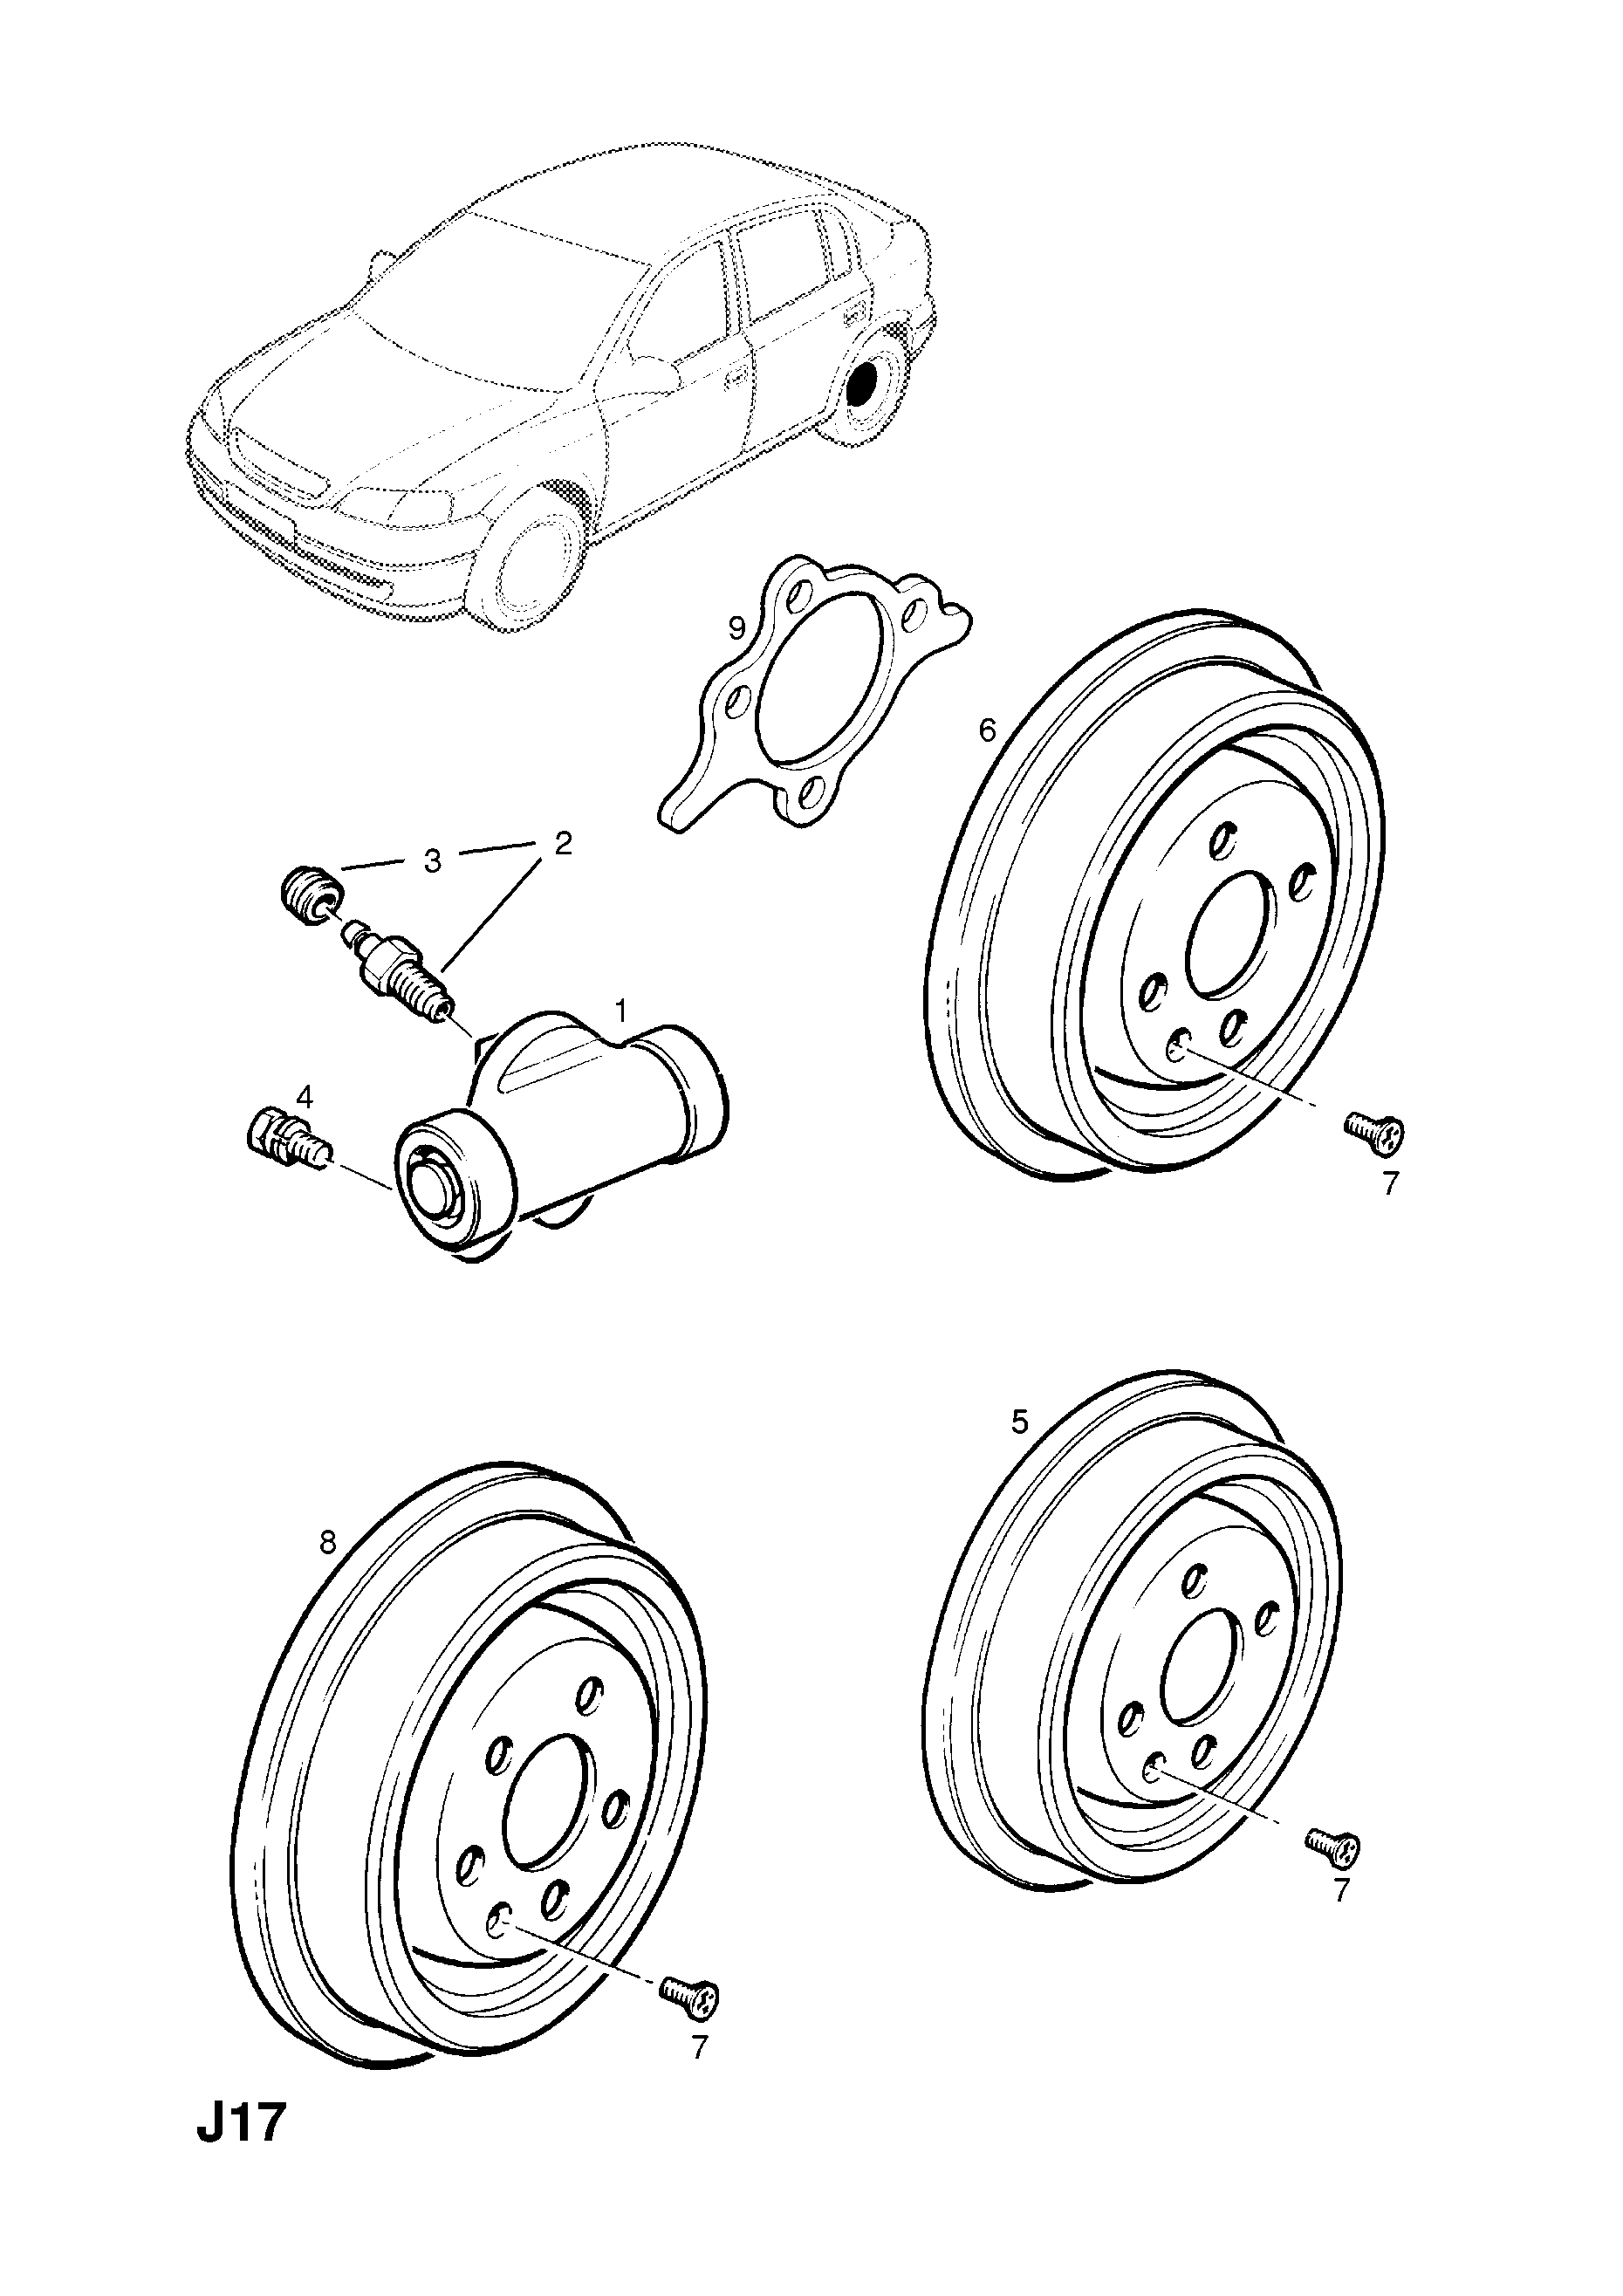 REAR BRAKE DRUM <small><i>[X12XE[LW4],Z12XE[LW4] ENGINES (-12999999  -15999999  -16999999  -18999999)]</i></small>